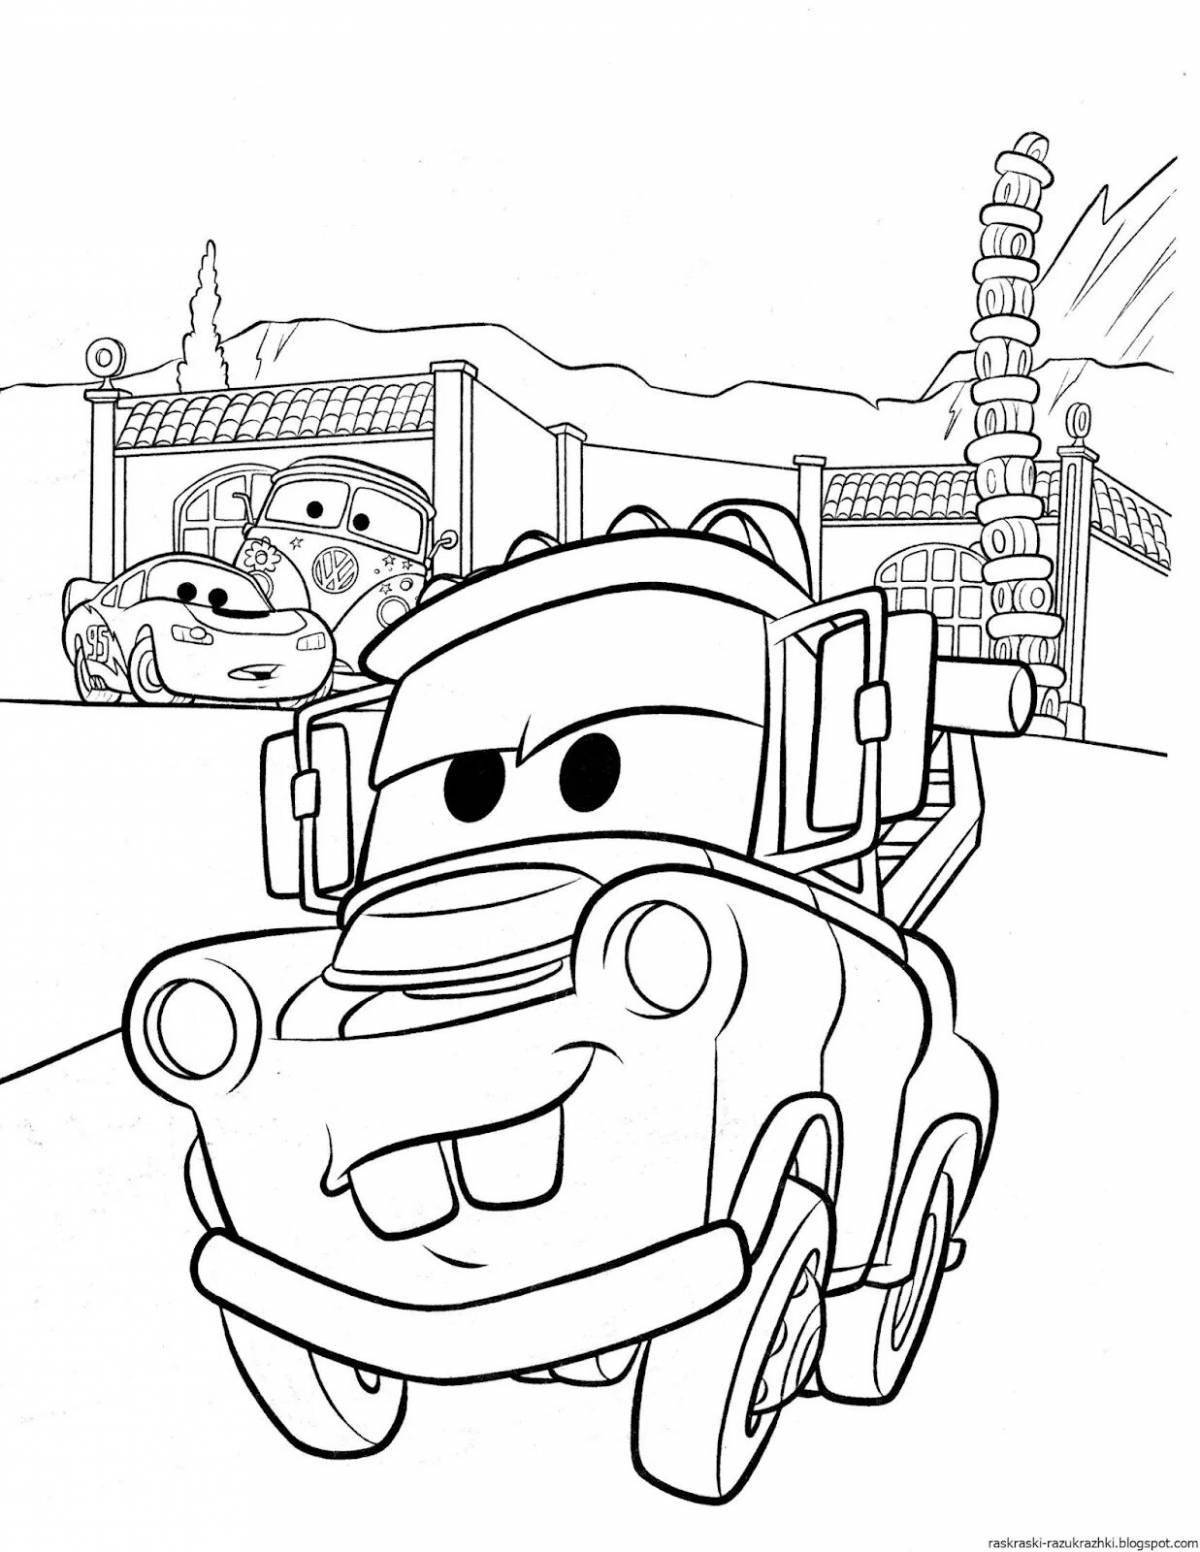 Adorable cars coloring book for children 6-7 years old